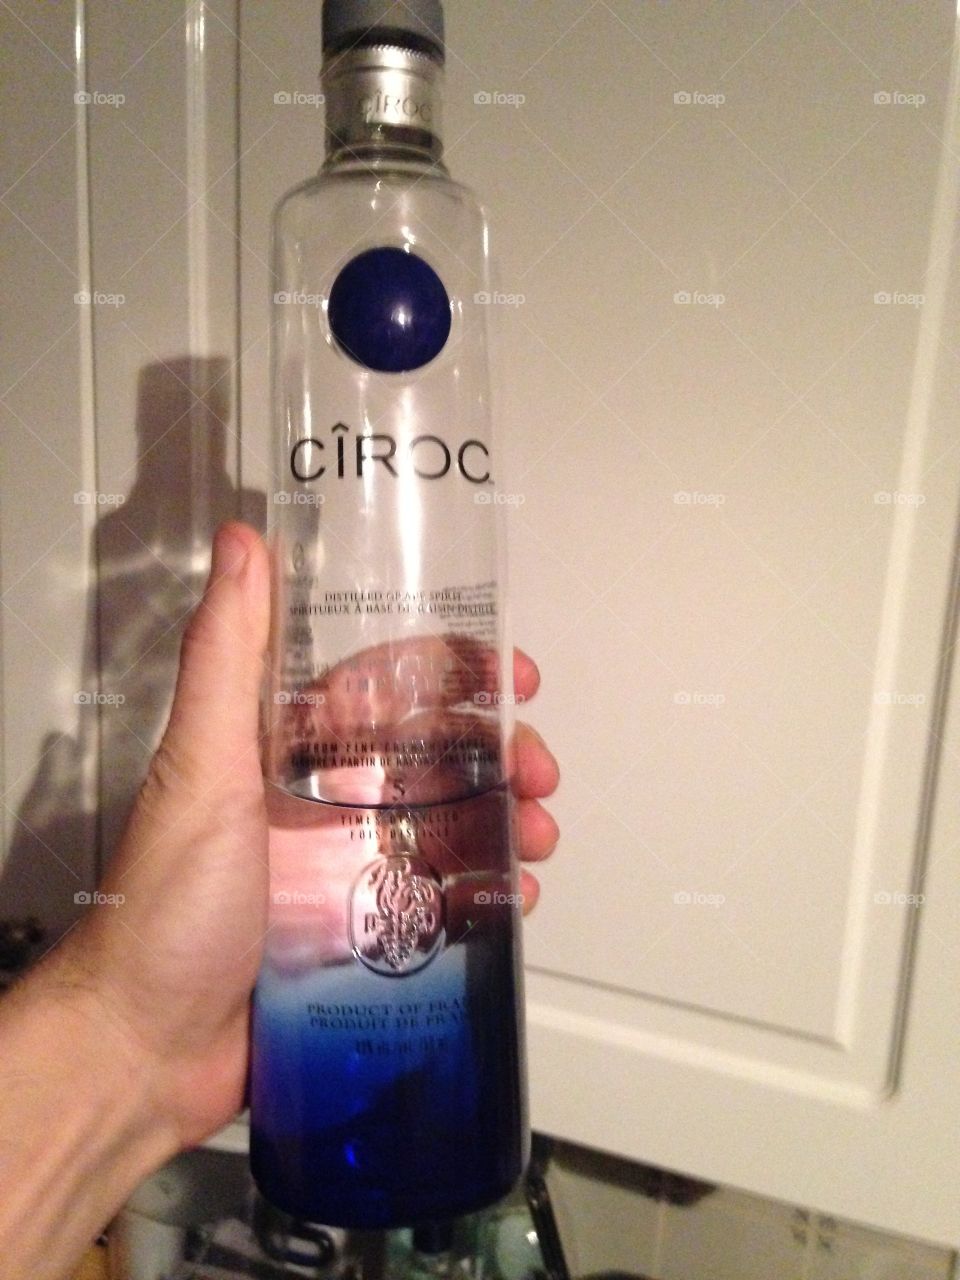 The start of a good night with a bottle of Ciroc